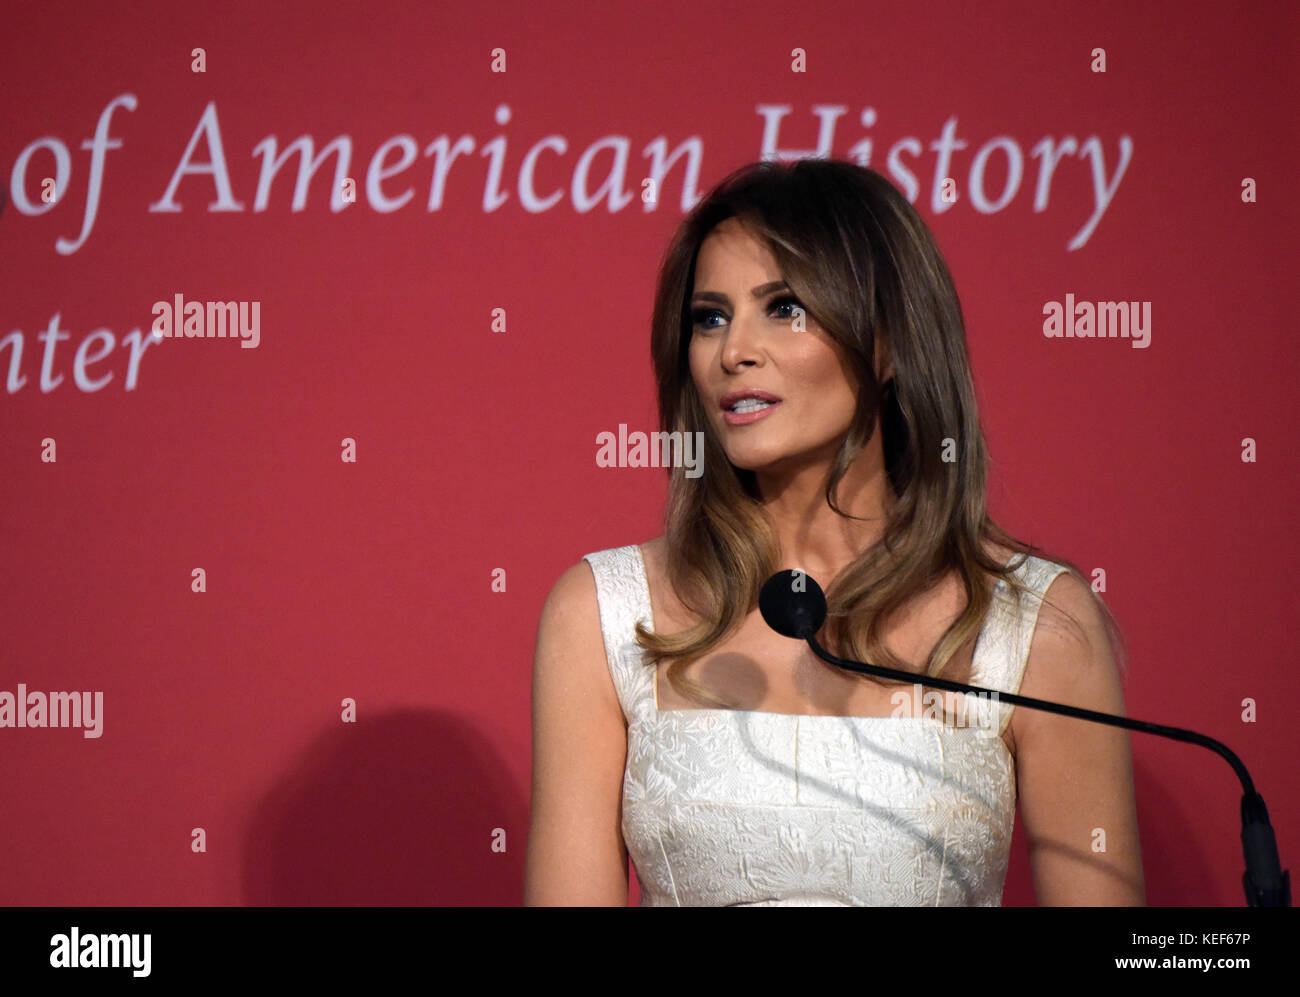 Washington, USA. 20th Oct, 2017. U.S. First Lady Melania Trump speaks during a donation ceremony of her inaugural ball gown at the National Museum of American History in Washington, DC, the United States, on Oct. 20, 2017. Melania Trump donated her inaugural ball gown to the First Ladies Collection here on Friday, adding to the museum's collection of 26 gowns worn by former first ladies. Credit: Yin Bogu/Xinhua/Alamy Live News Stock Photo